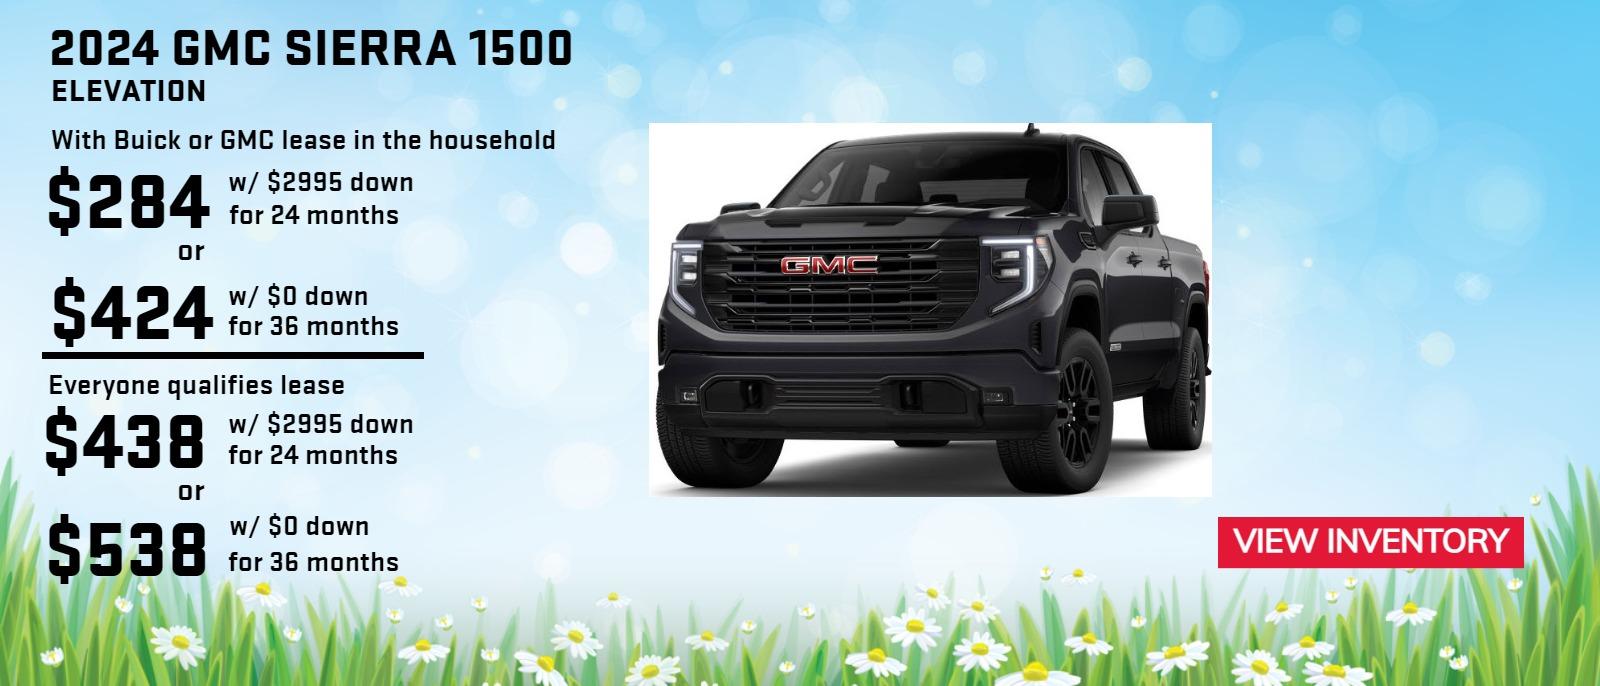 2024 GMC Sierra 1500 Elevation - With Buick or GMC lease in the household $284 w/ $2995 down for 24 months or $424 with $0 down for 36 months. Everyone qualifies lease $438 w/ $2995 down for 24 months or $538 with $0 down for 36 months.